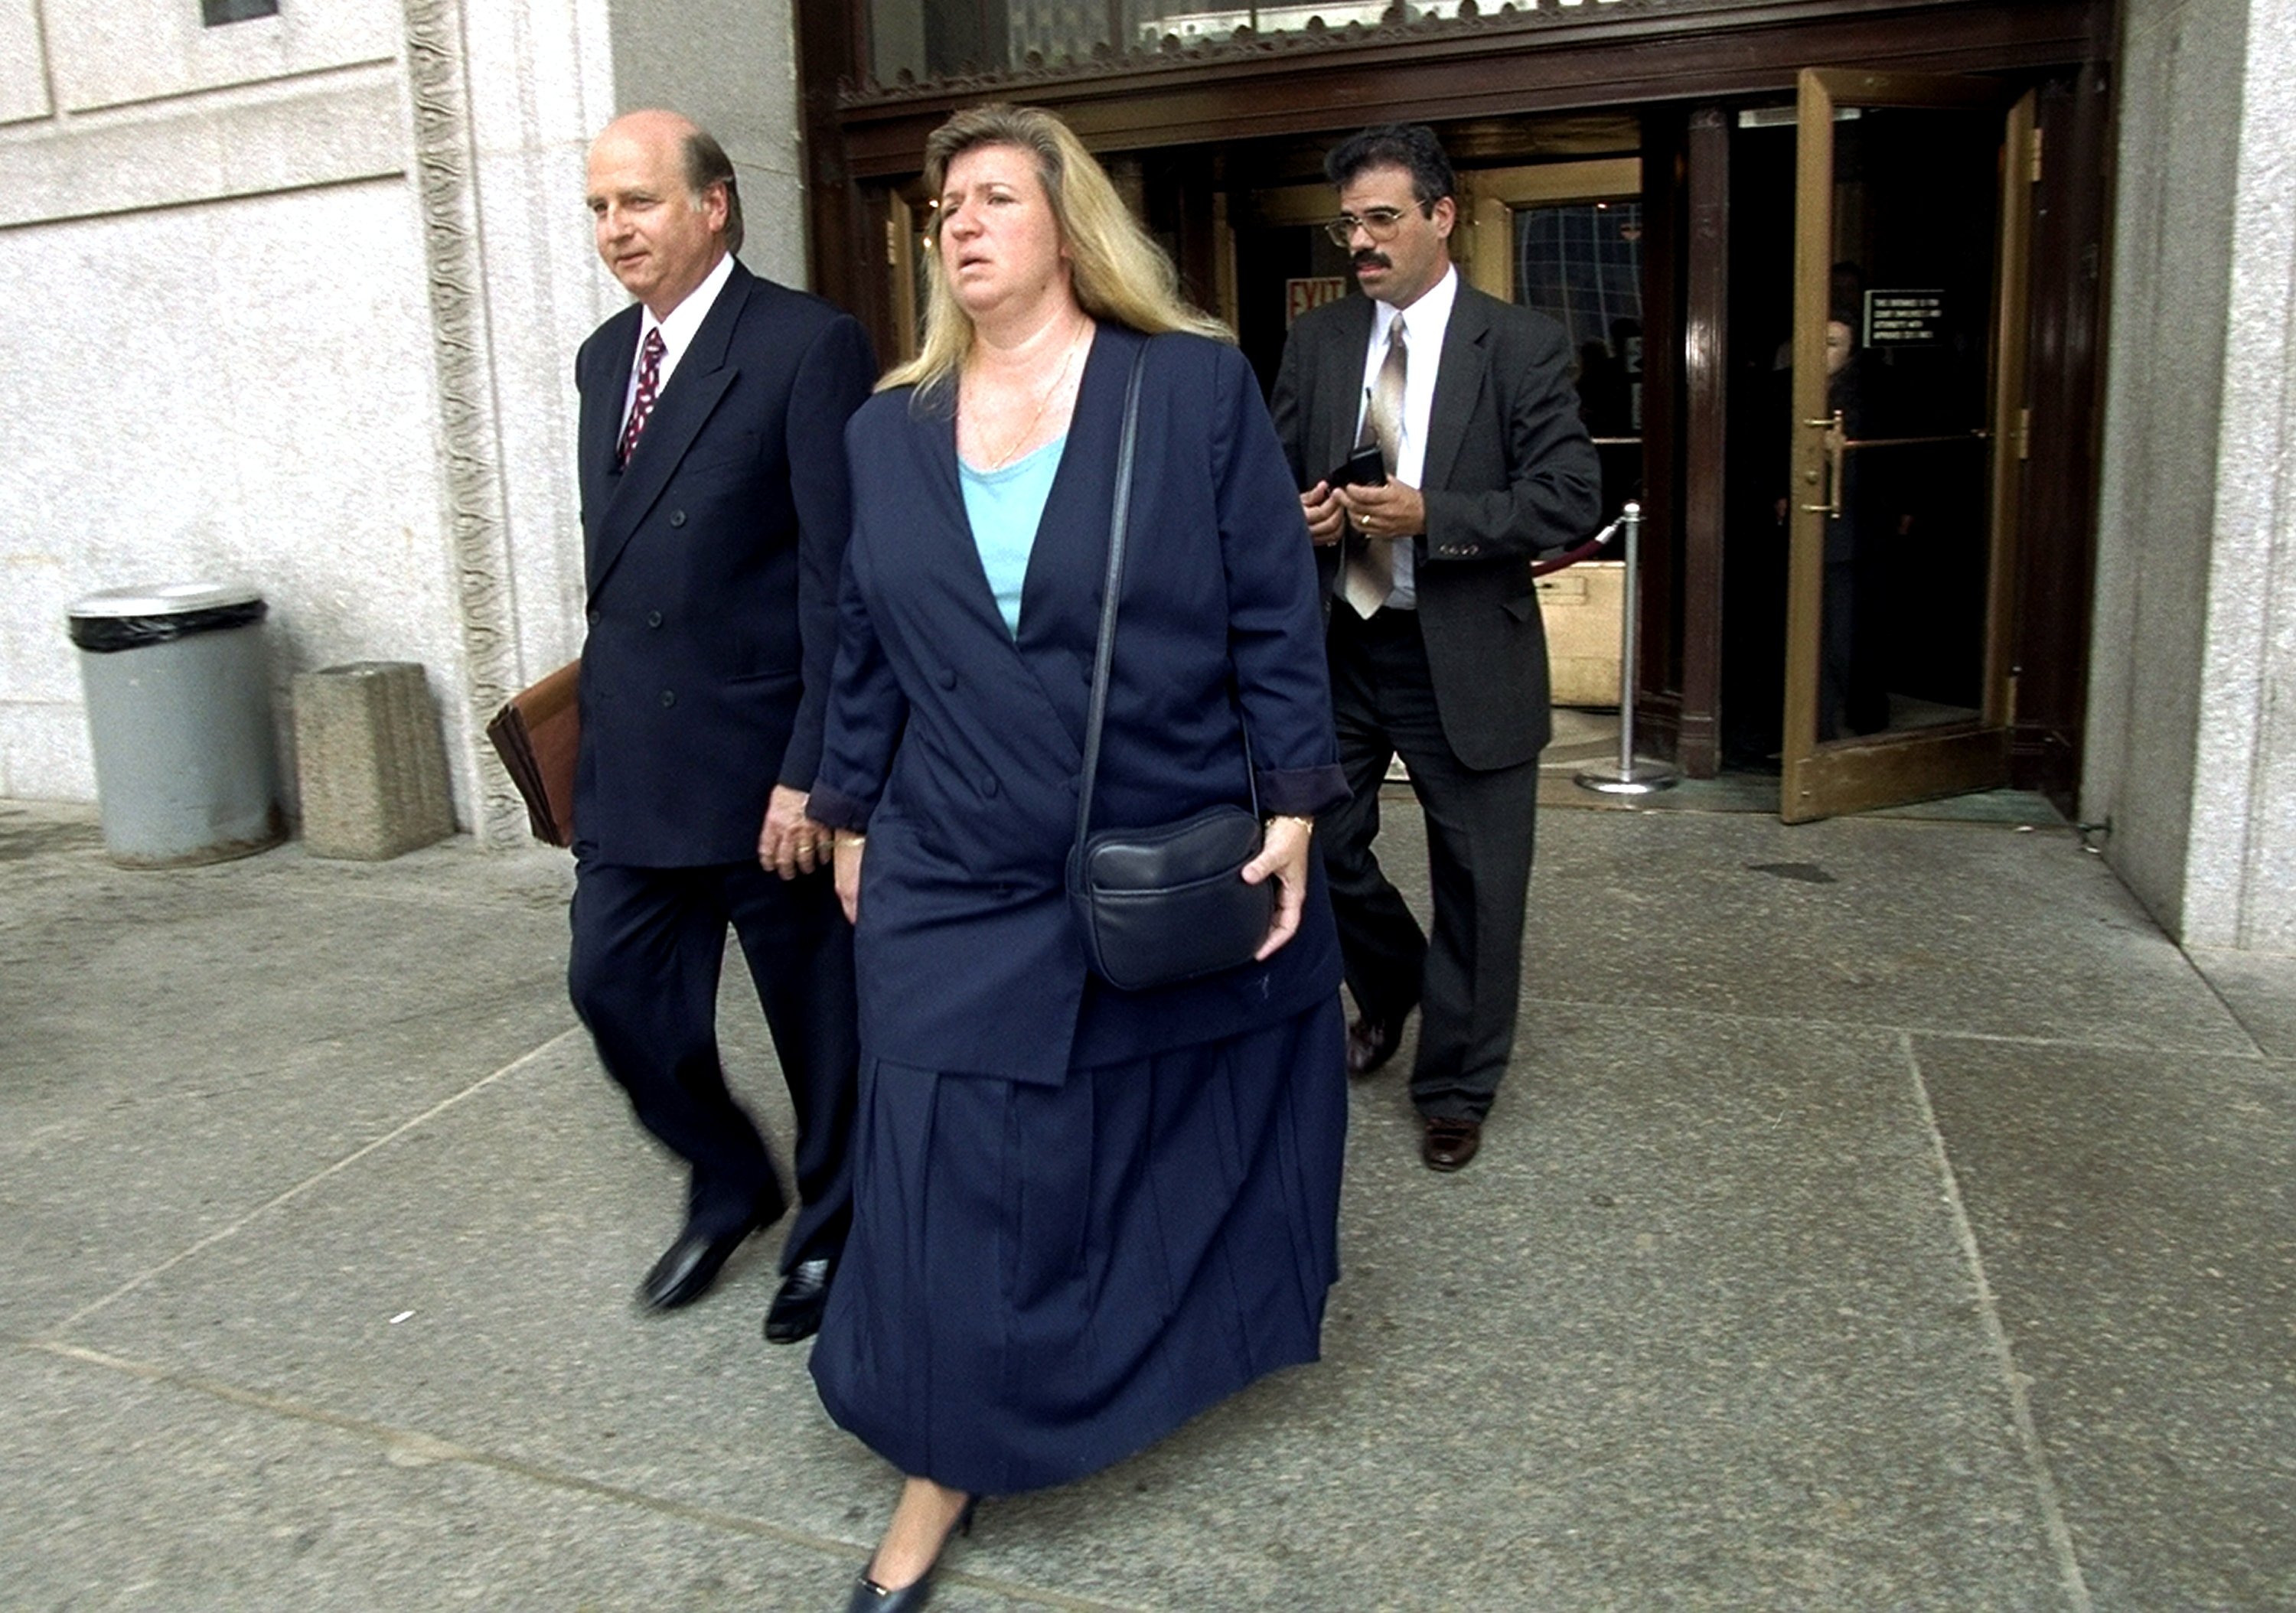 Donna and her husband Richard Fasano leaving court with their lawyer. | Source: Getty Images